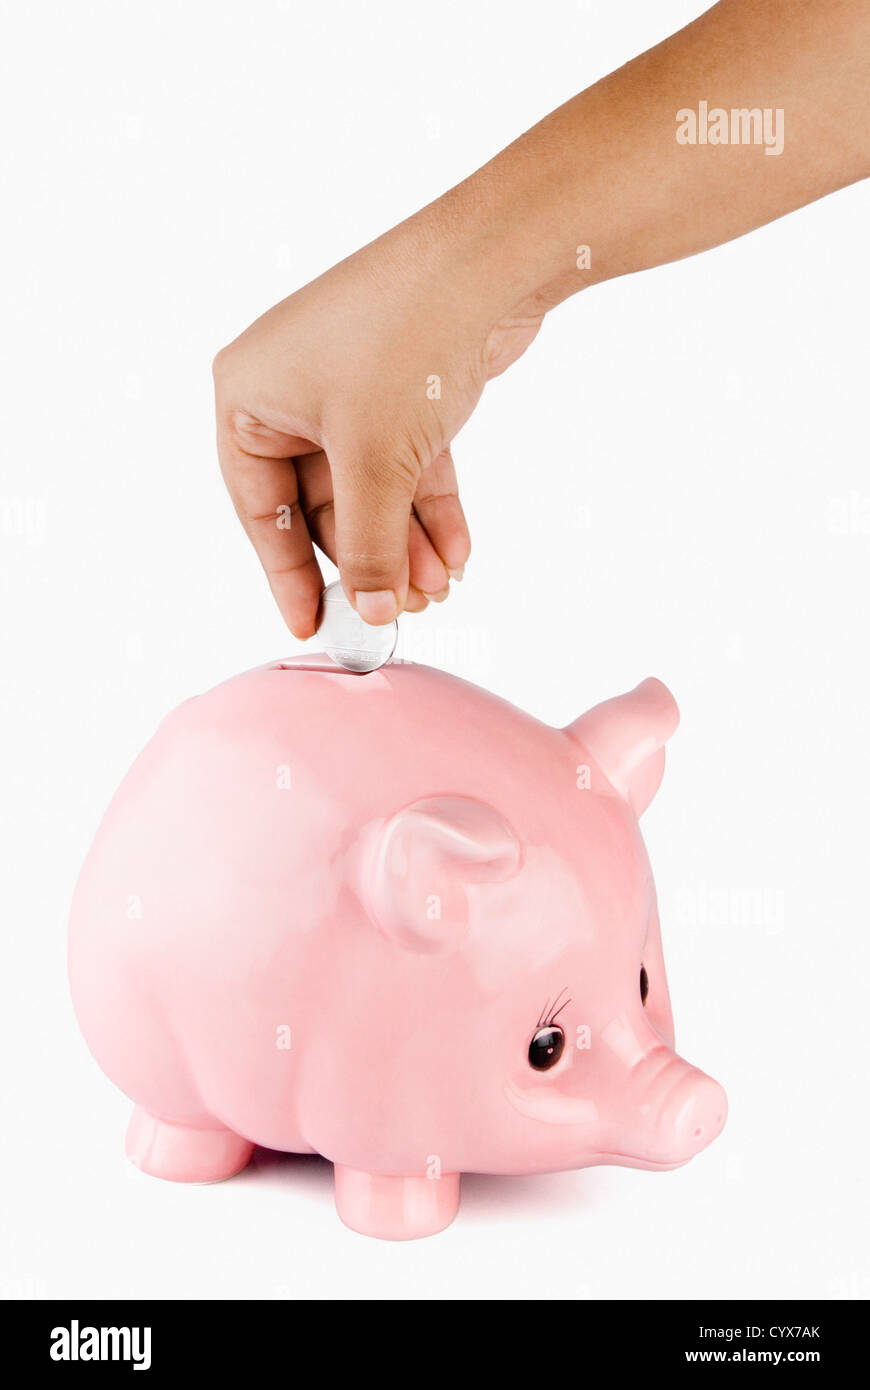 Close-up of a person's hand putting a coin into a piggy bank Stock Photo